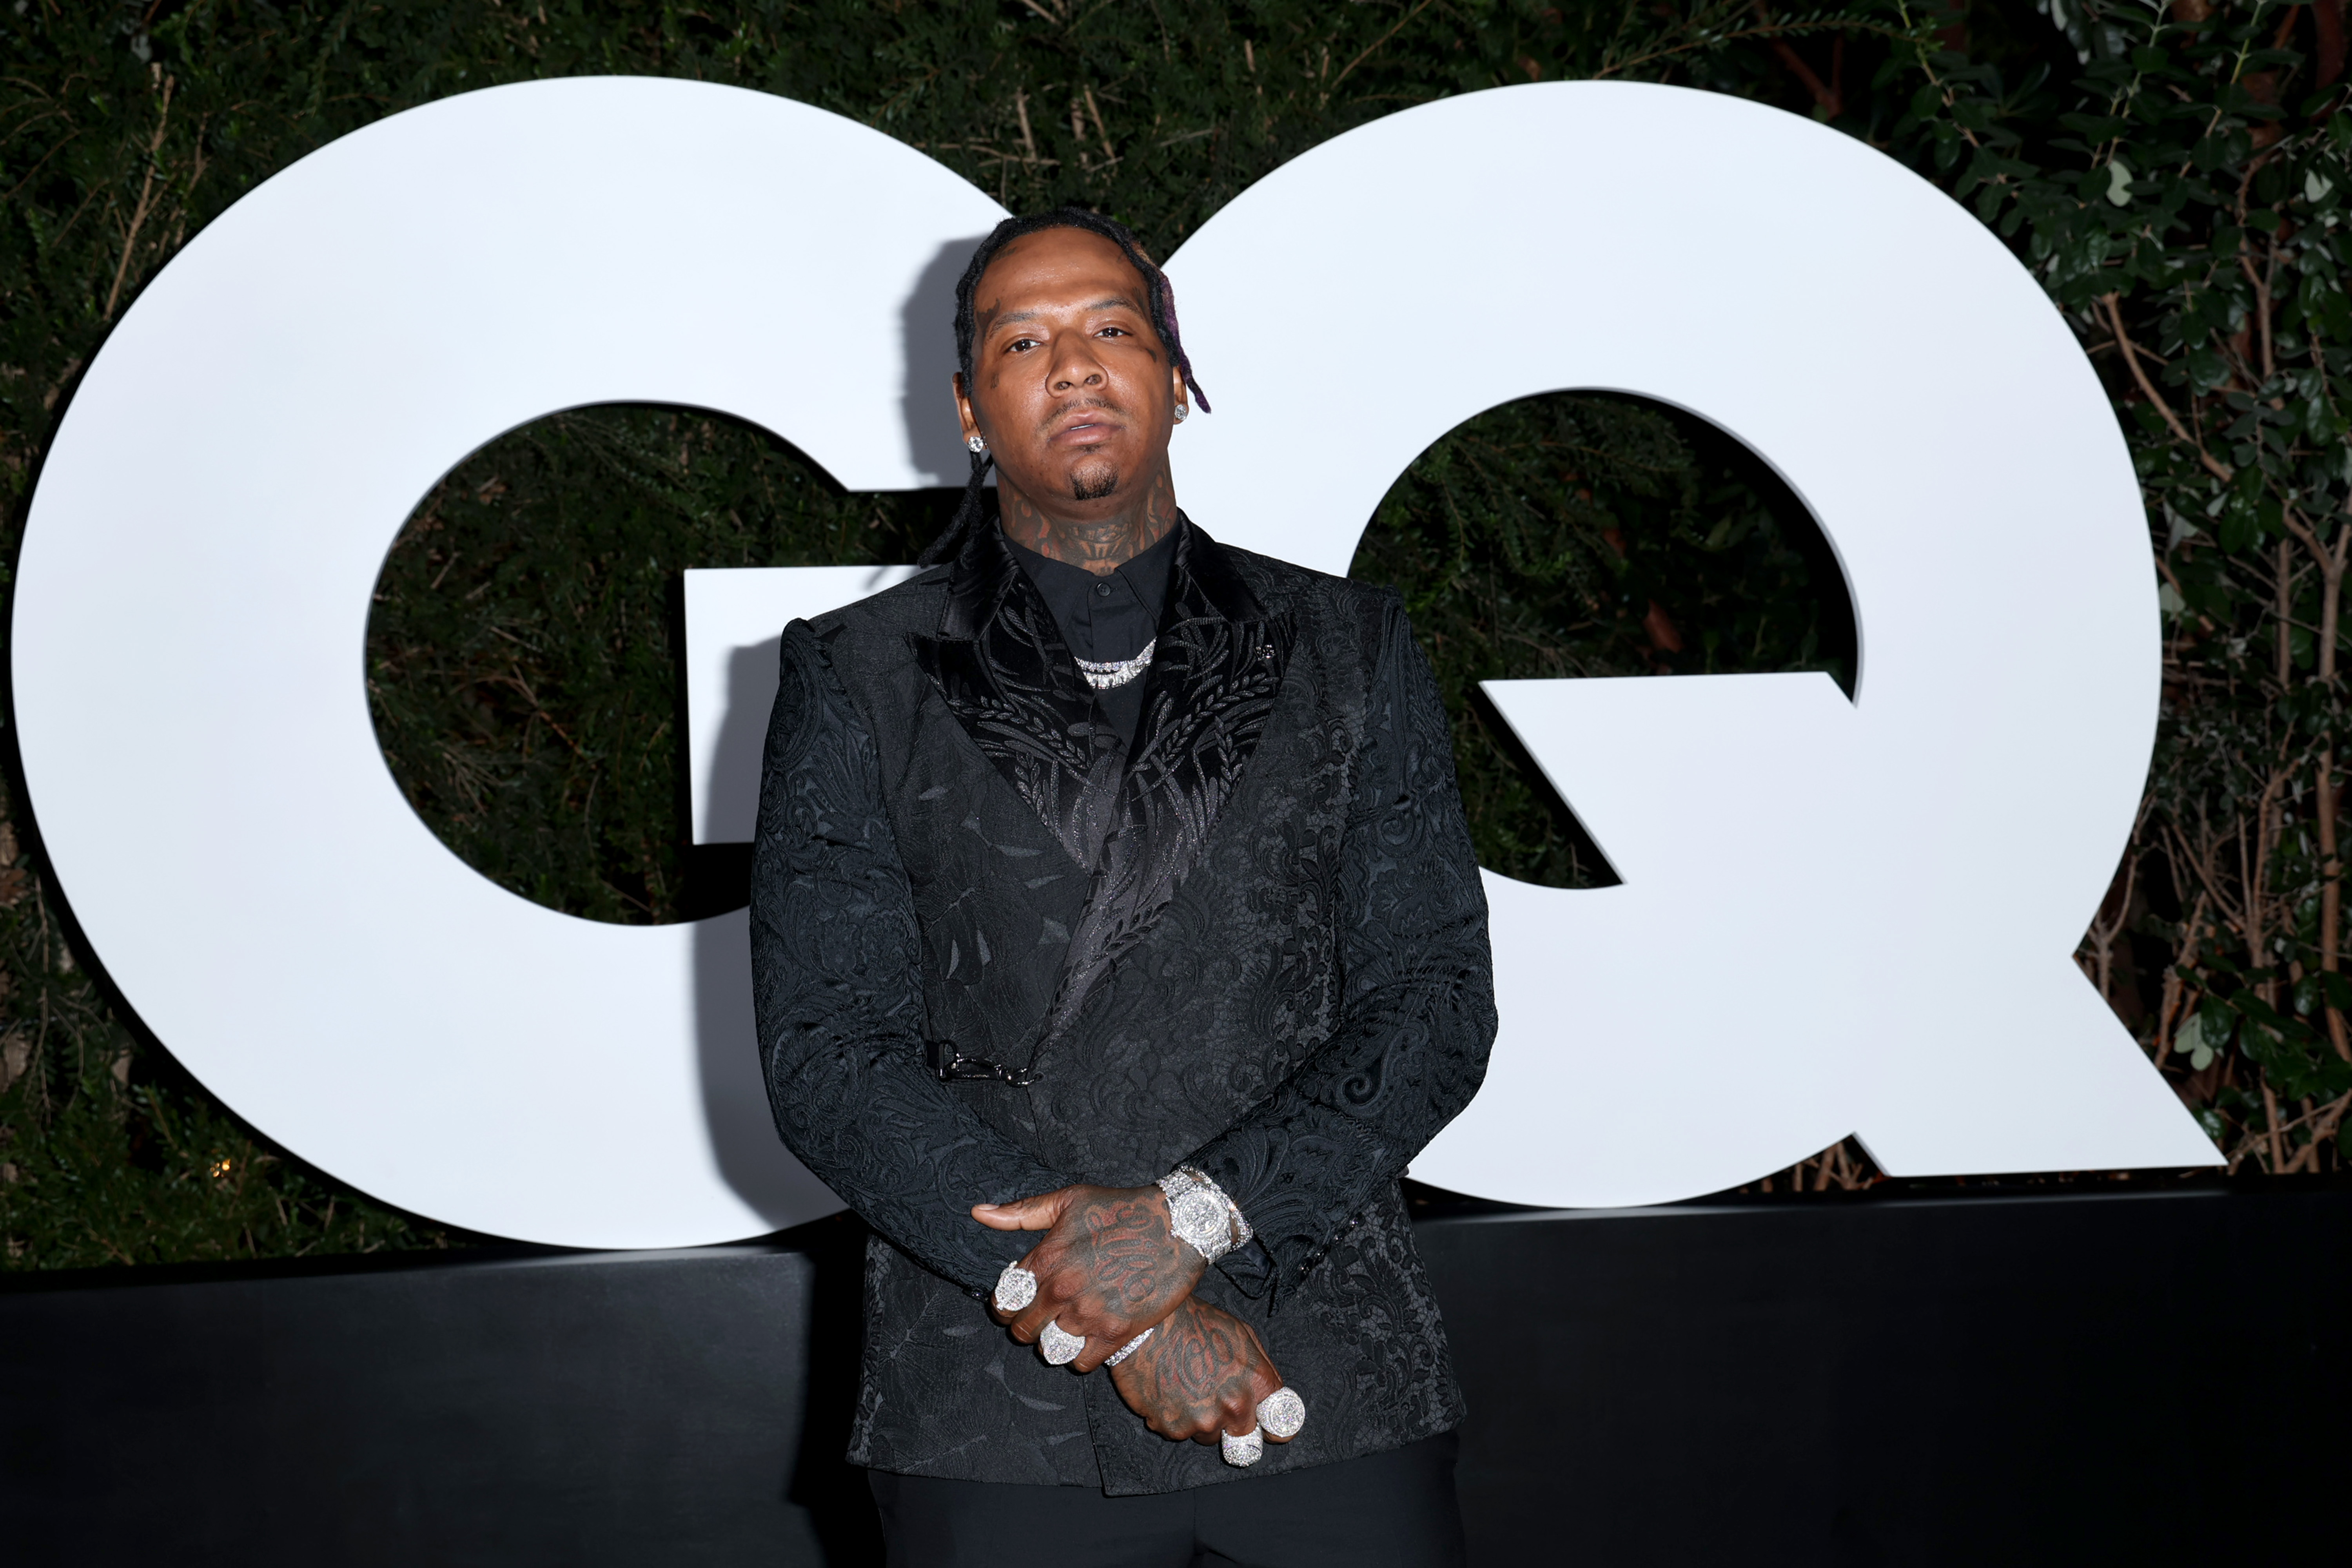 Moneybagg Yo delays album release because of Taylor Swift